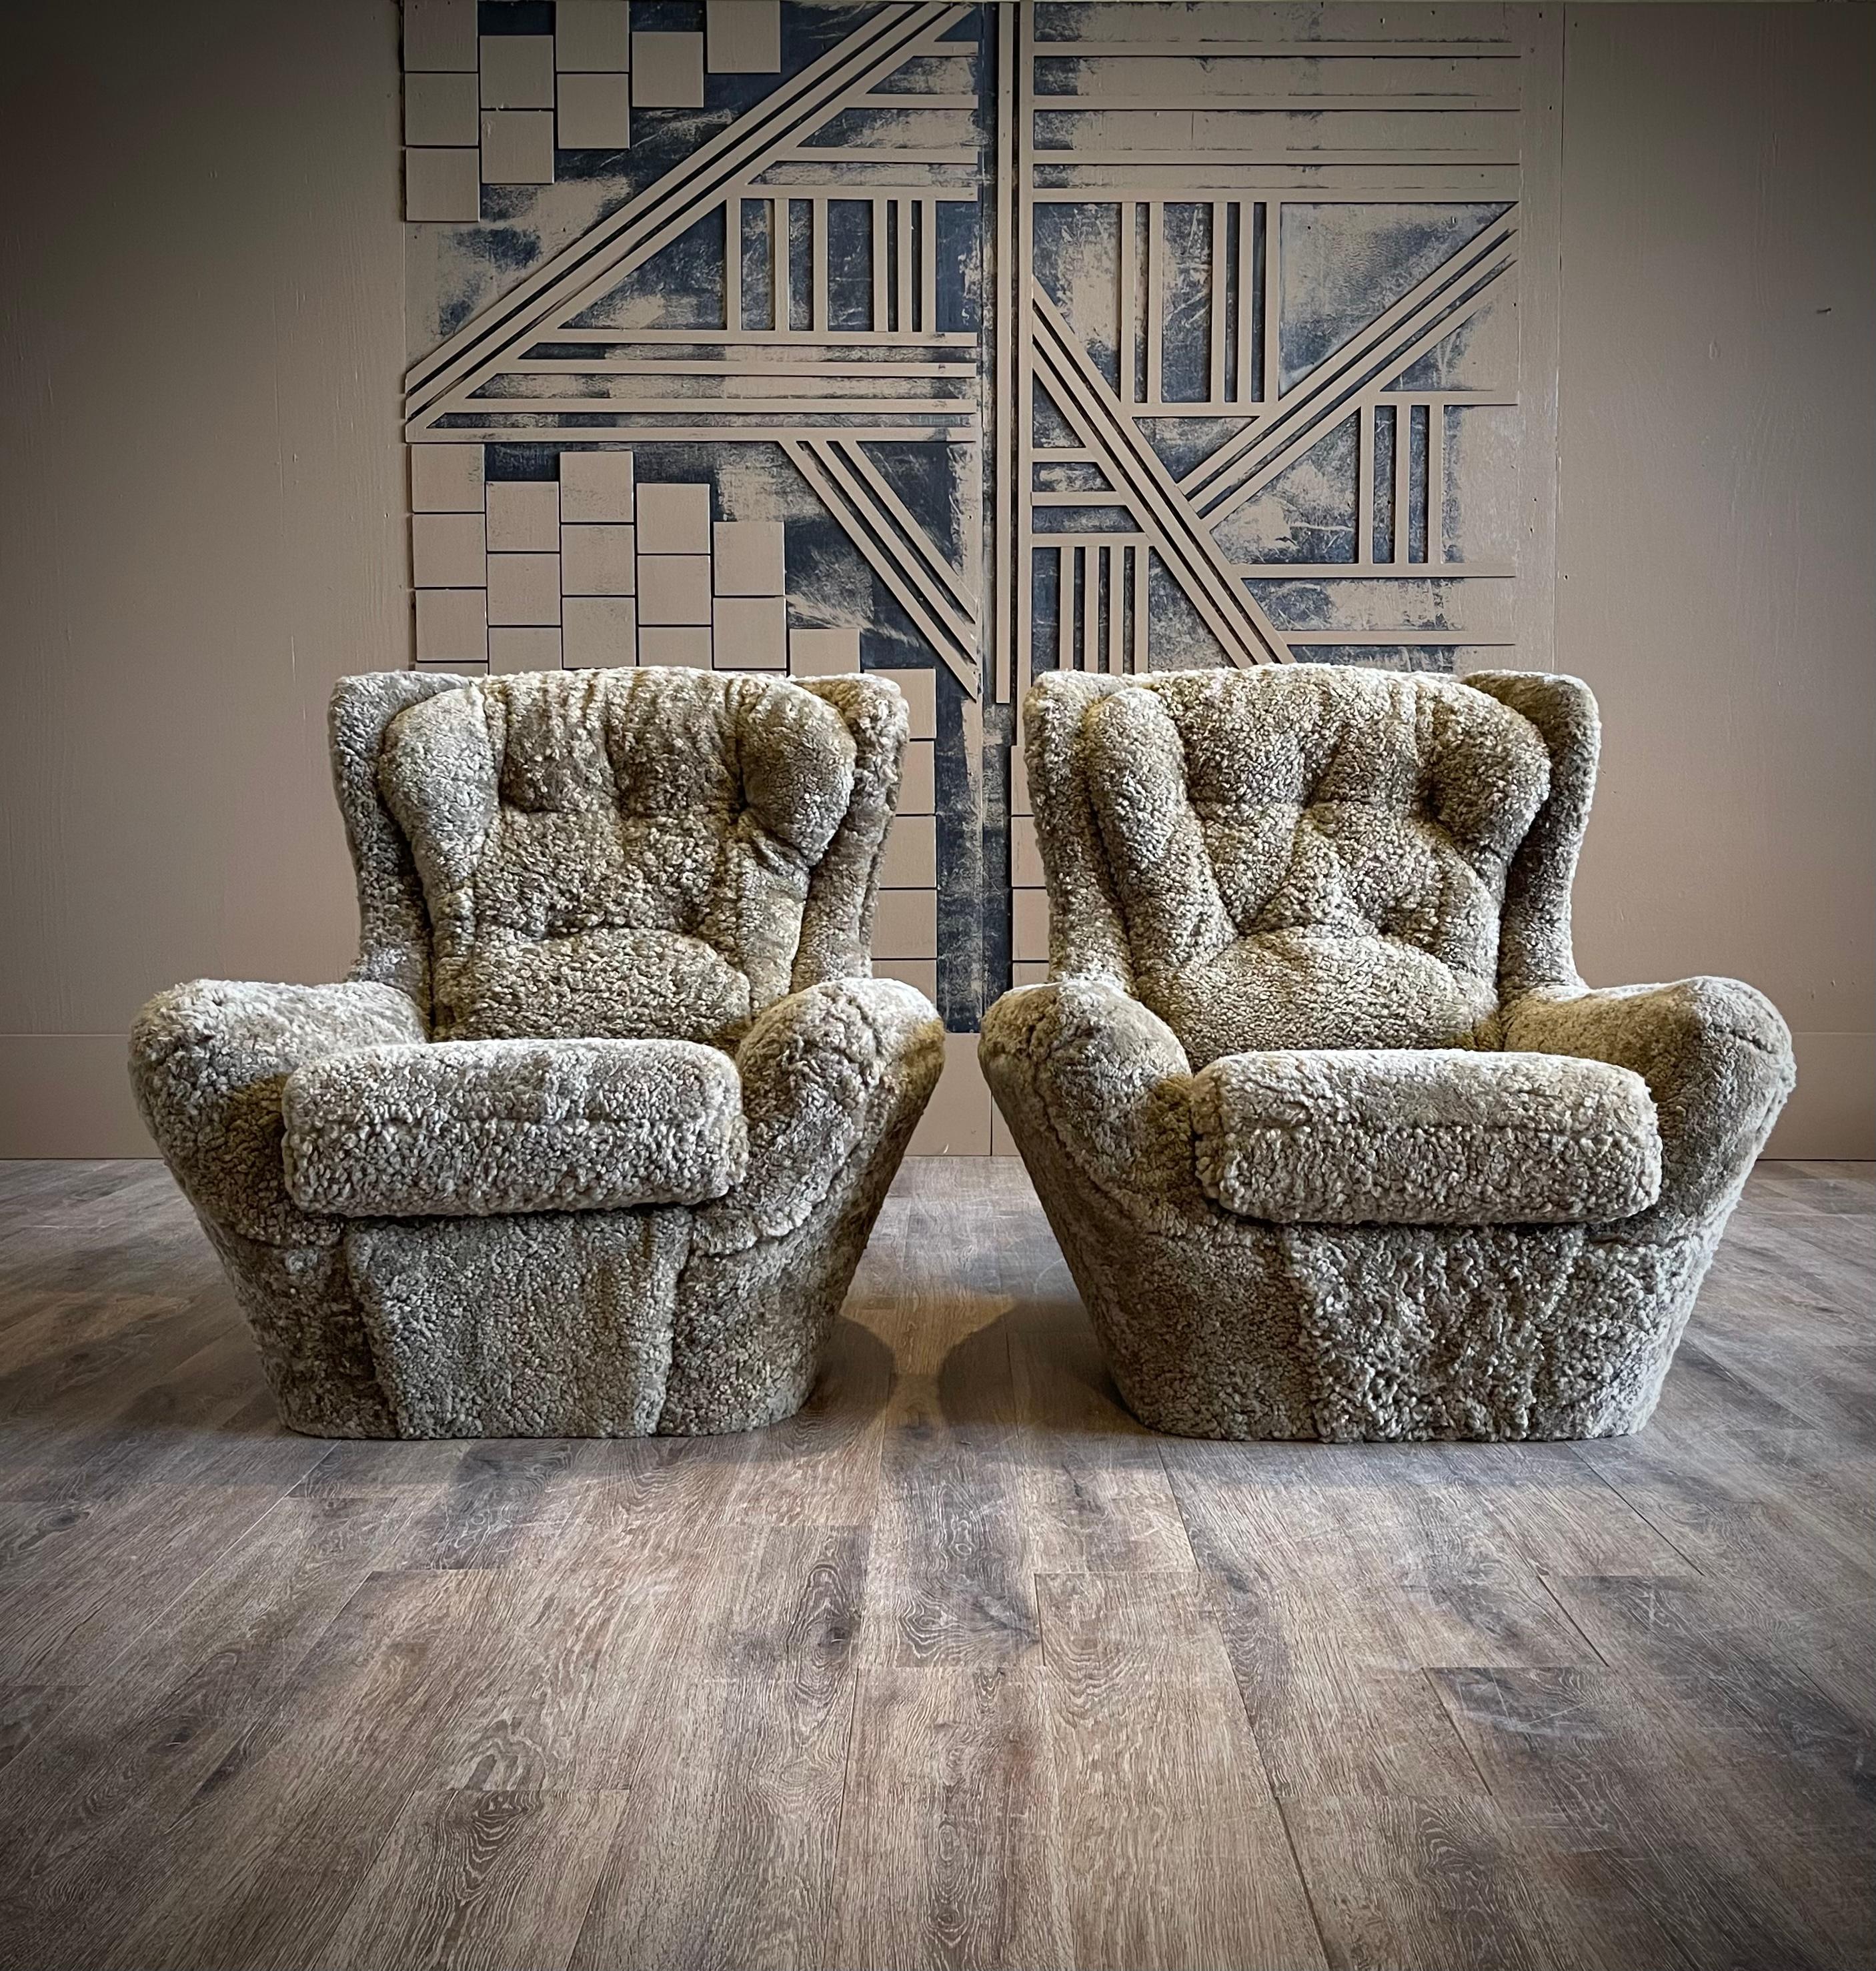 20th Century Pair French MCM Steiner Knoll Lounge Chairs in Sheepskin / Shearling For Sale